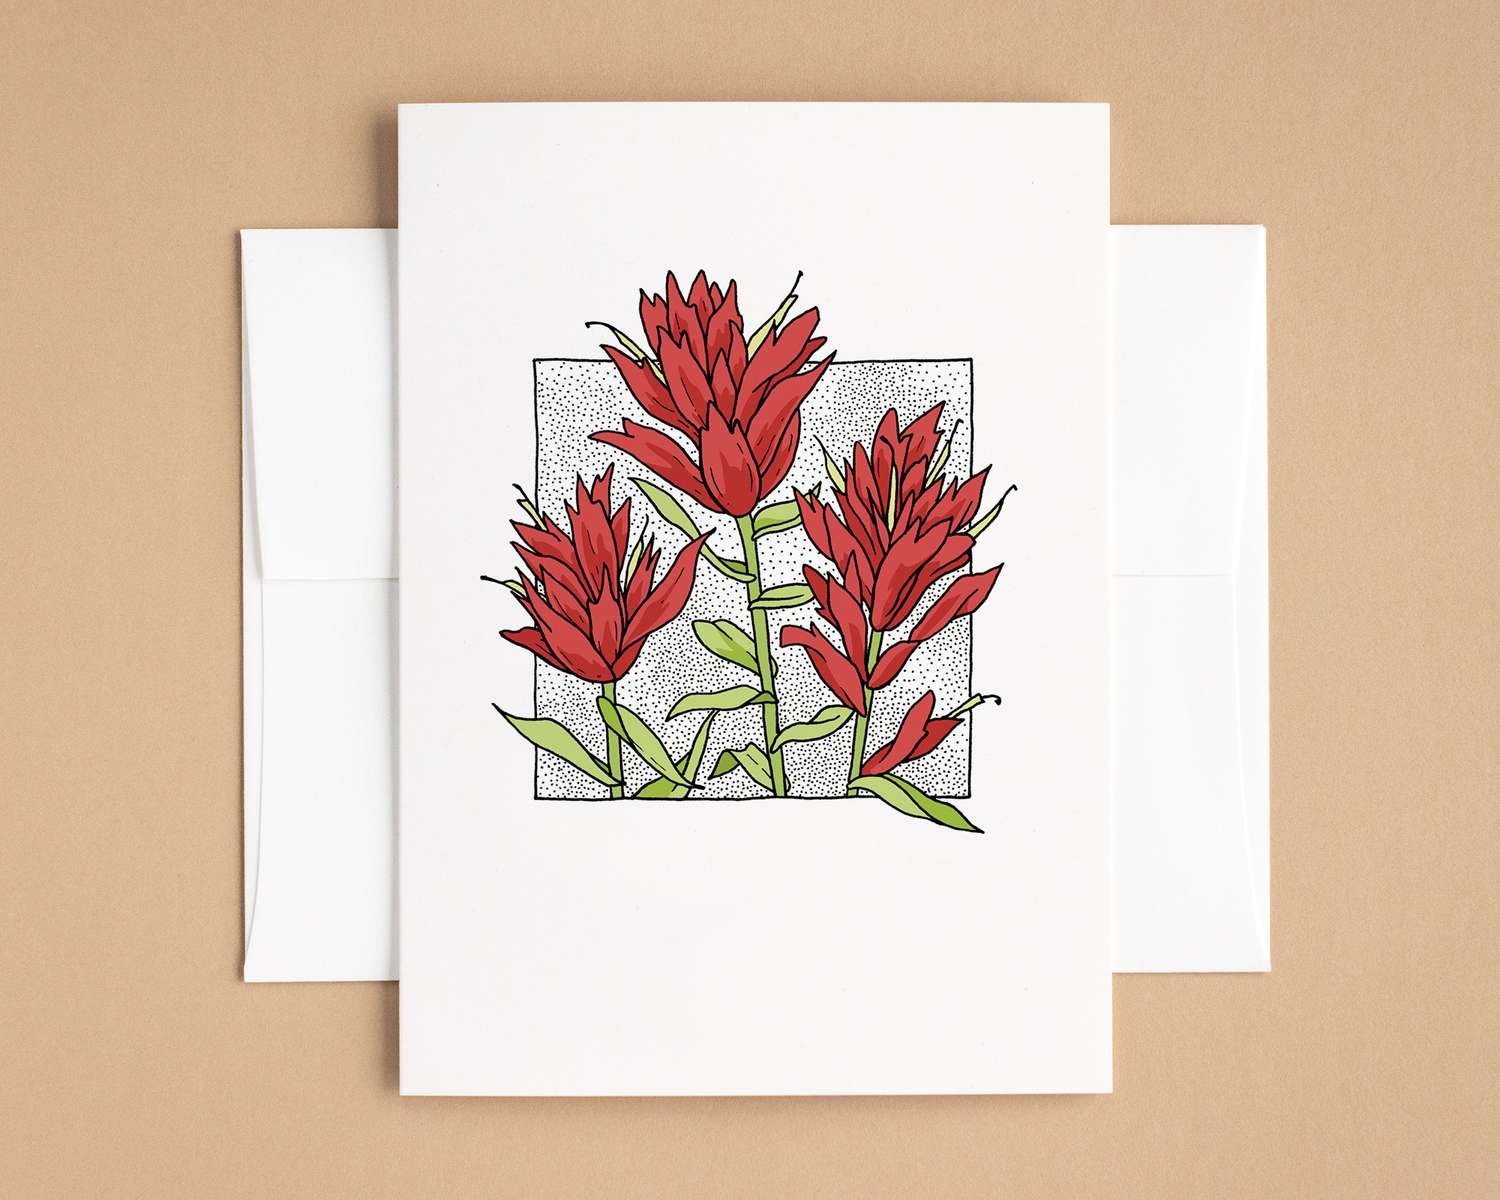 A vertical white card depicts three tall red flowers. The card sits on top of a white envelope, which lies on top of a brown backdrop.